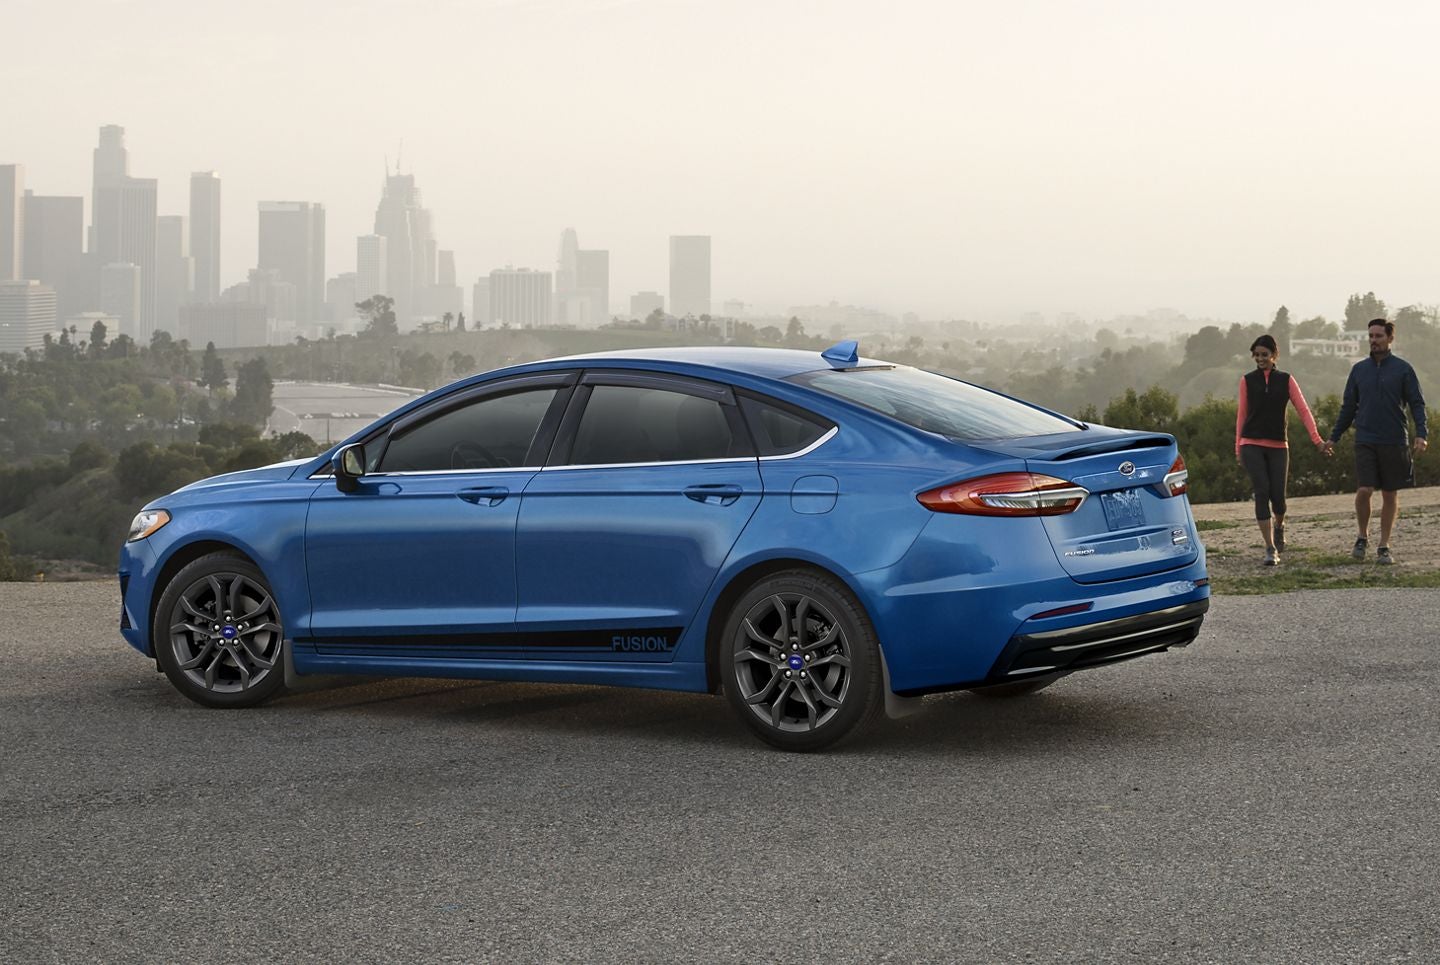 Meet the All-New 2020 Ford Fusion